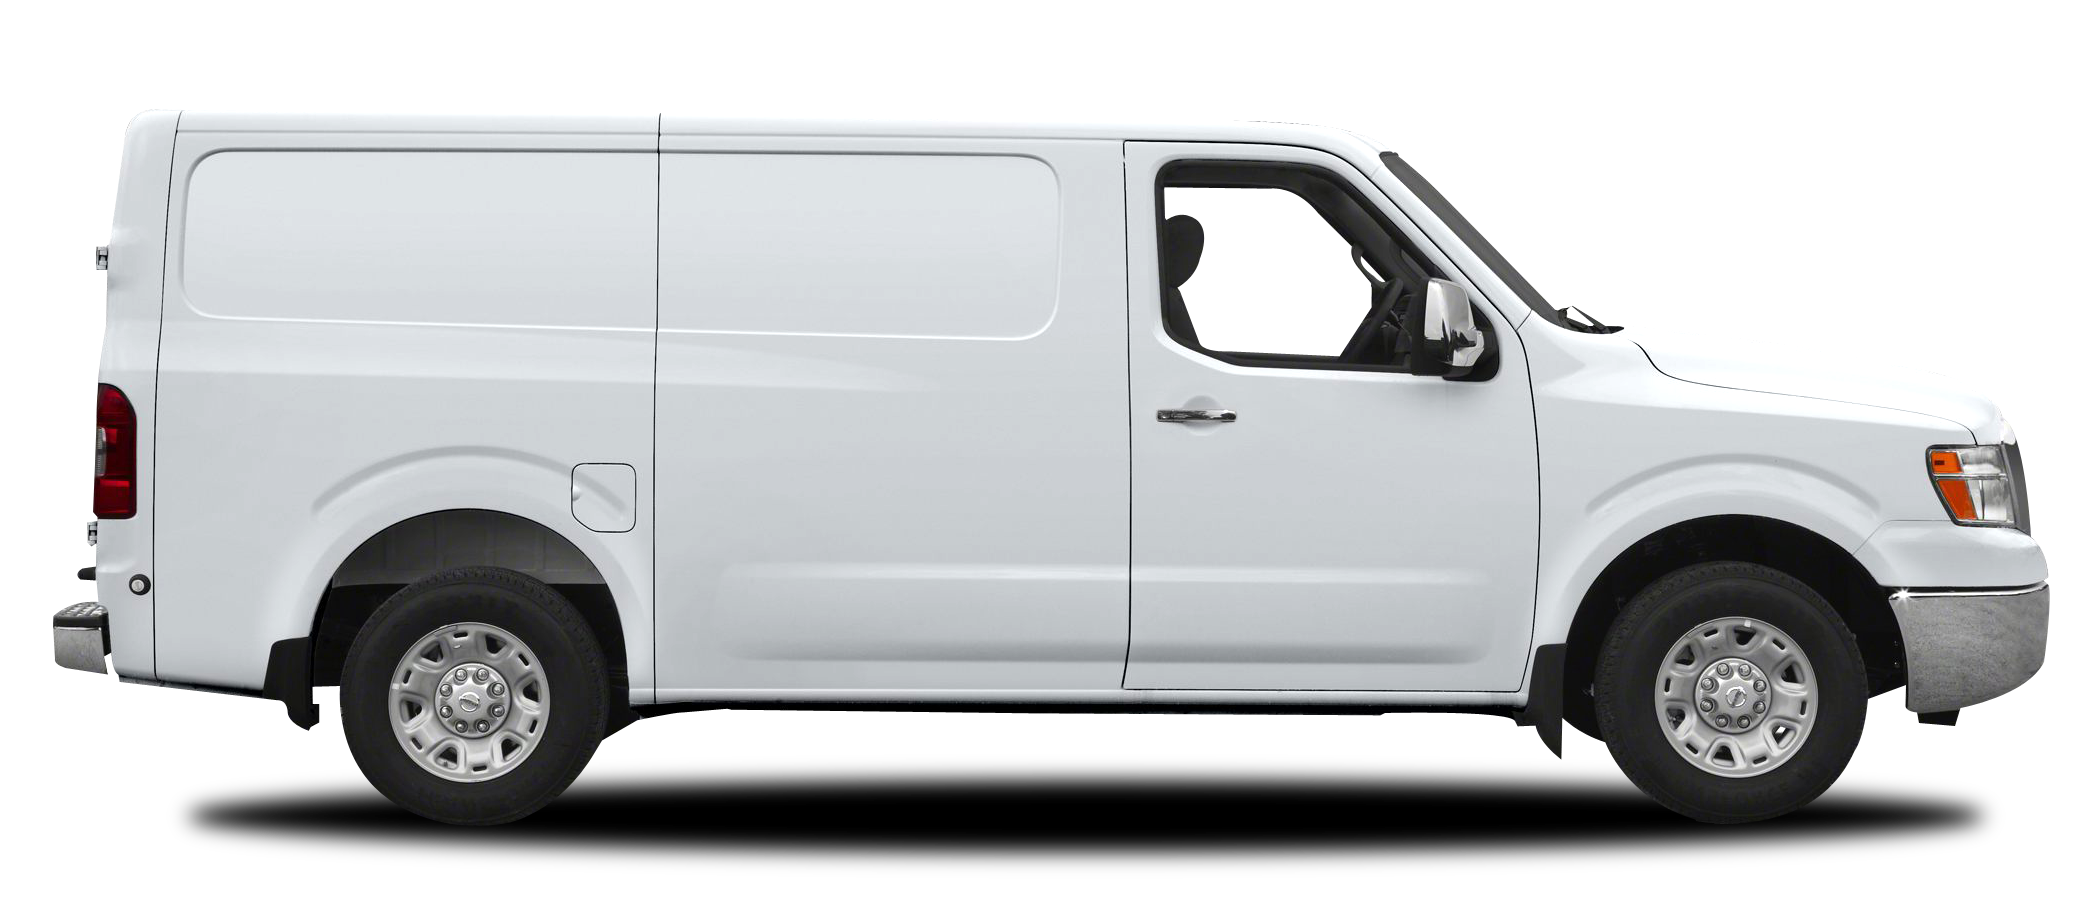 Delivery Van Png Image - Black And White Van, Transparent background PNG HD thumbnail